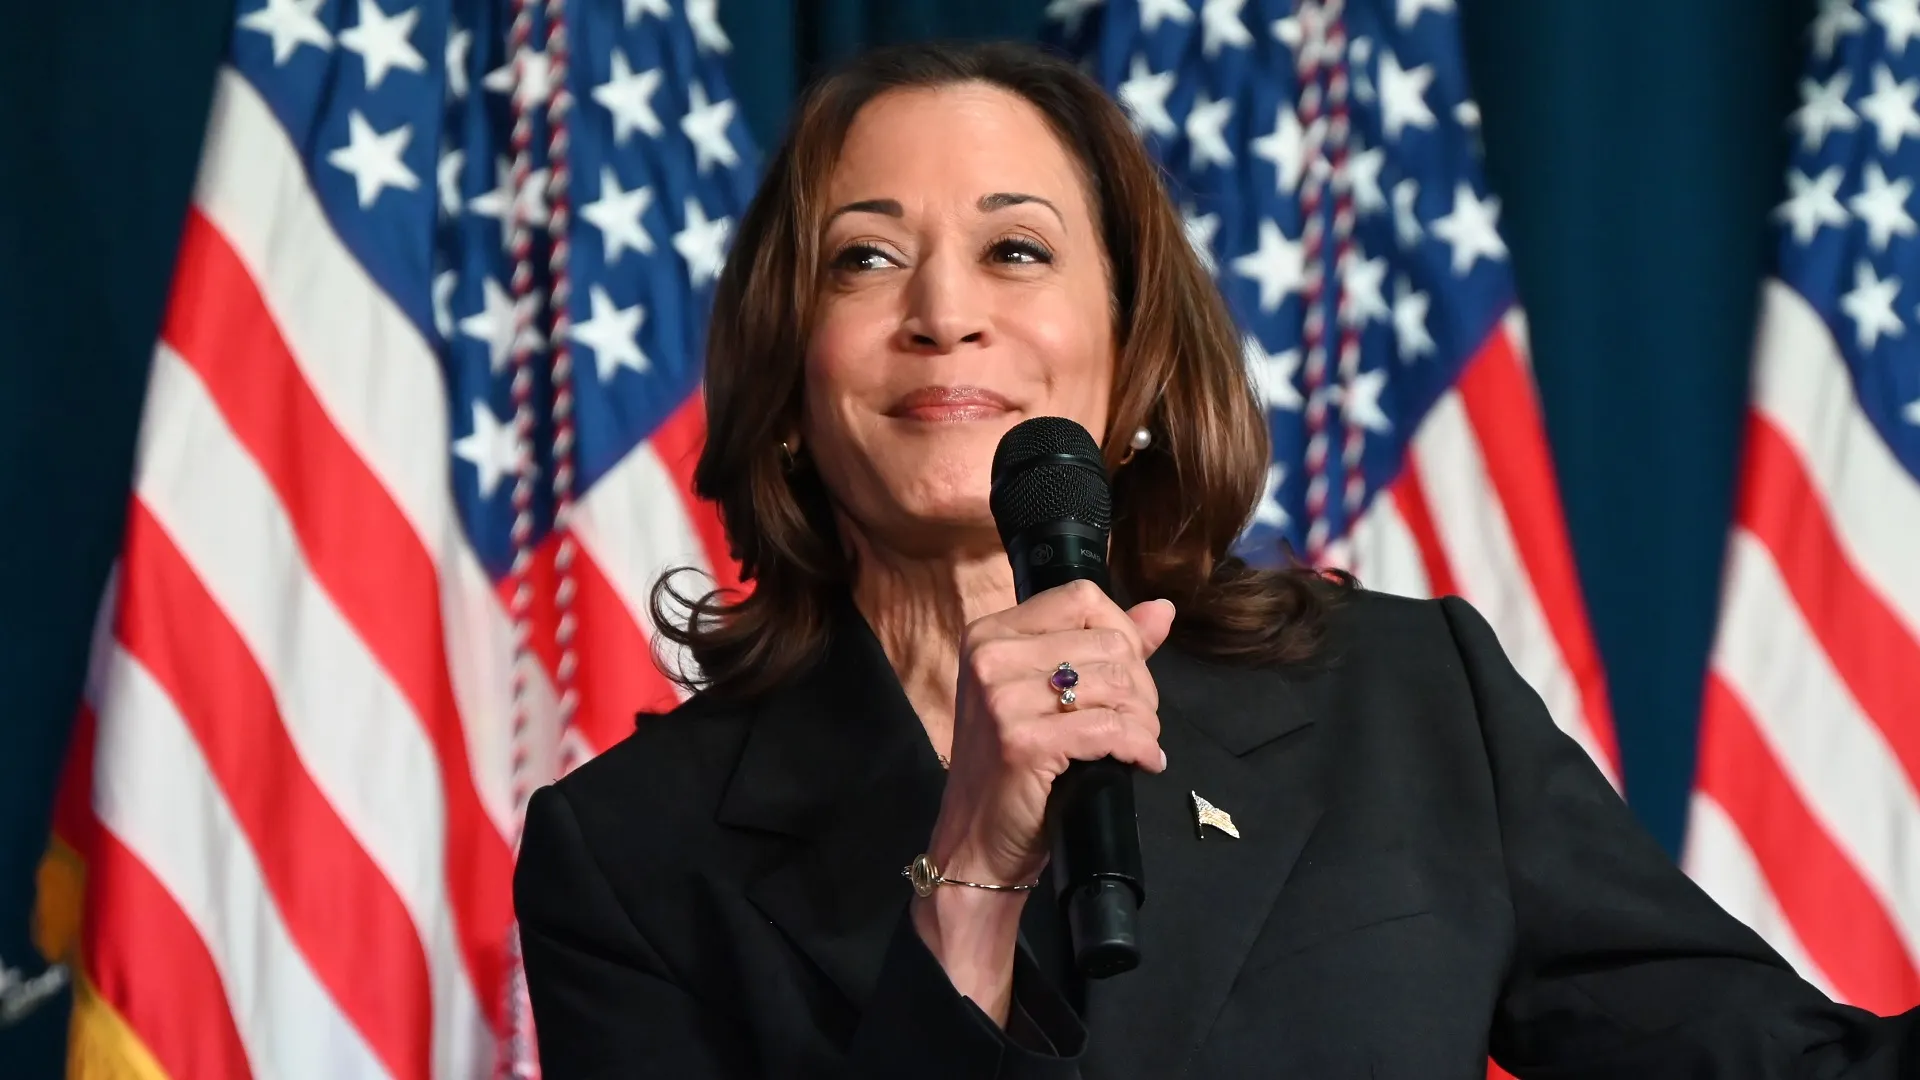 Vice President Of The United States Kamala Harris Delivers Remarks At Michigan Campaign Event On Donald J. Trump Assassination Attempt, Portage - 17 Jul 2024